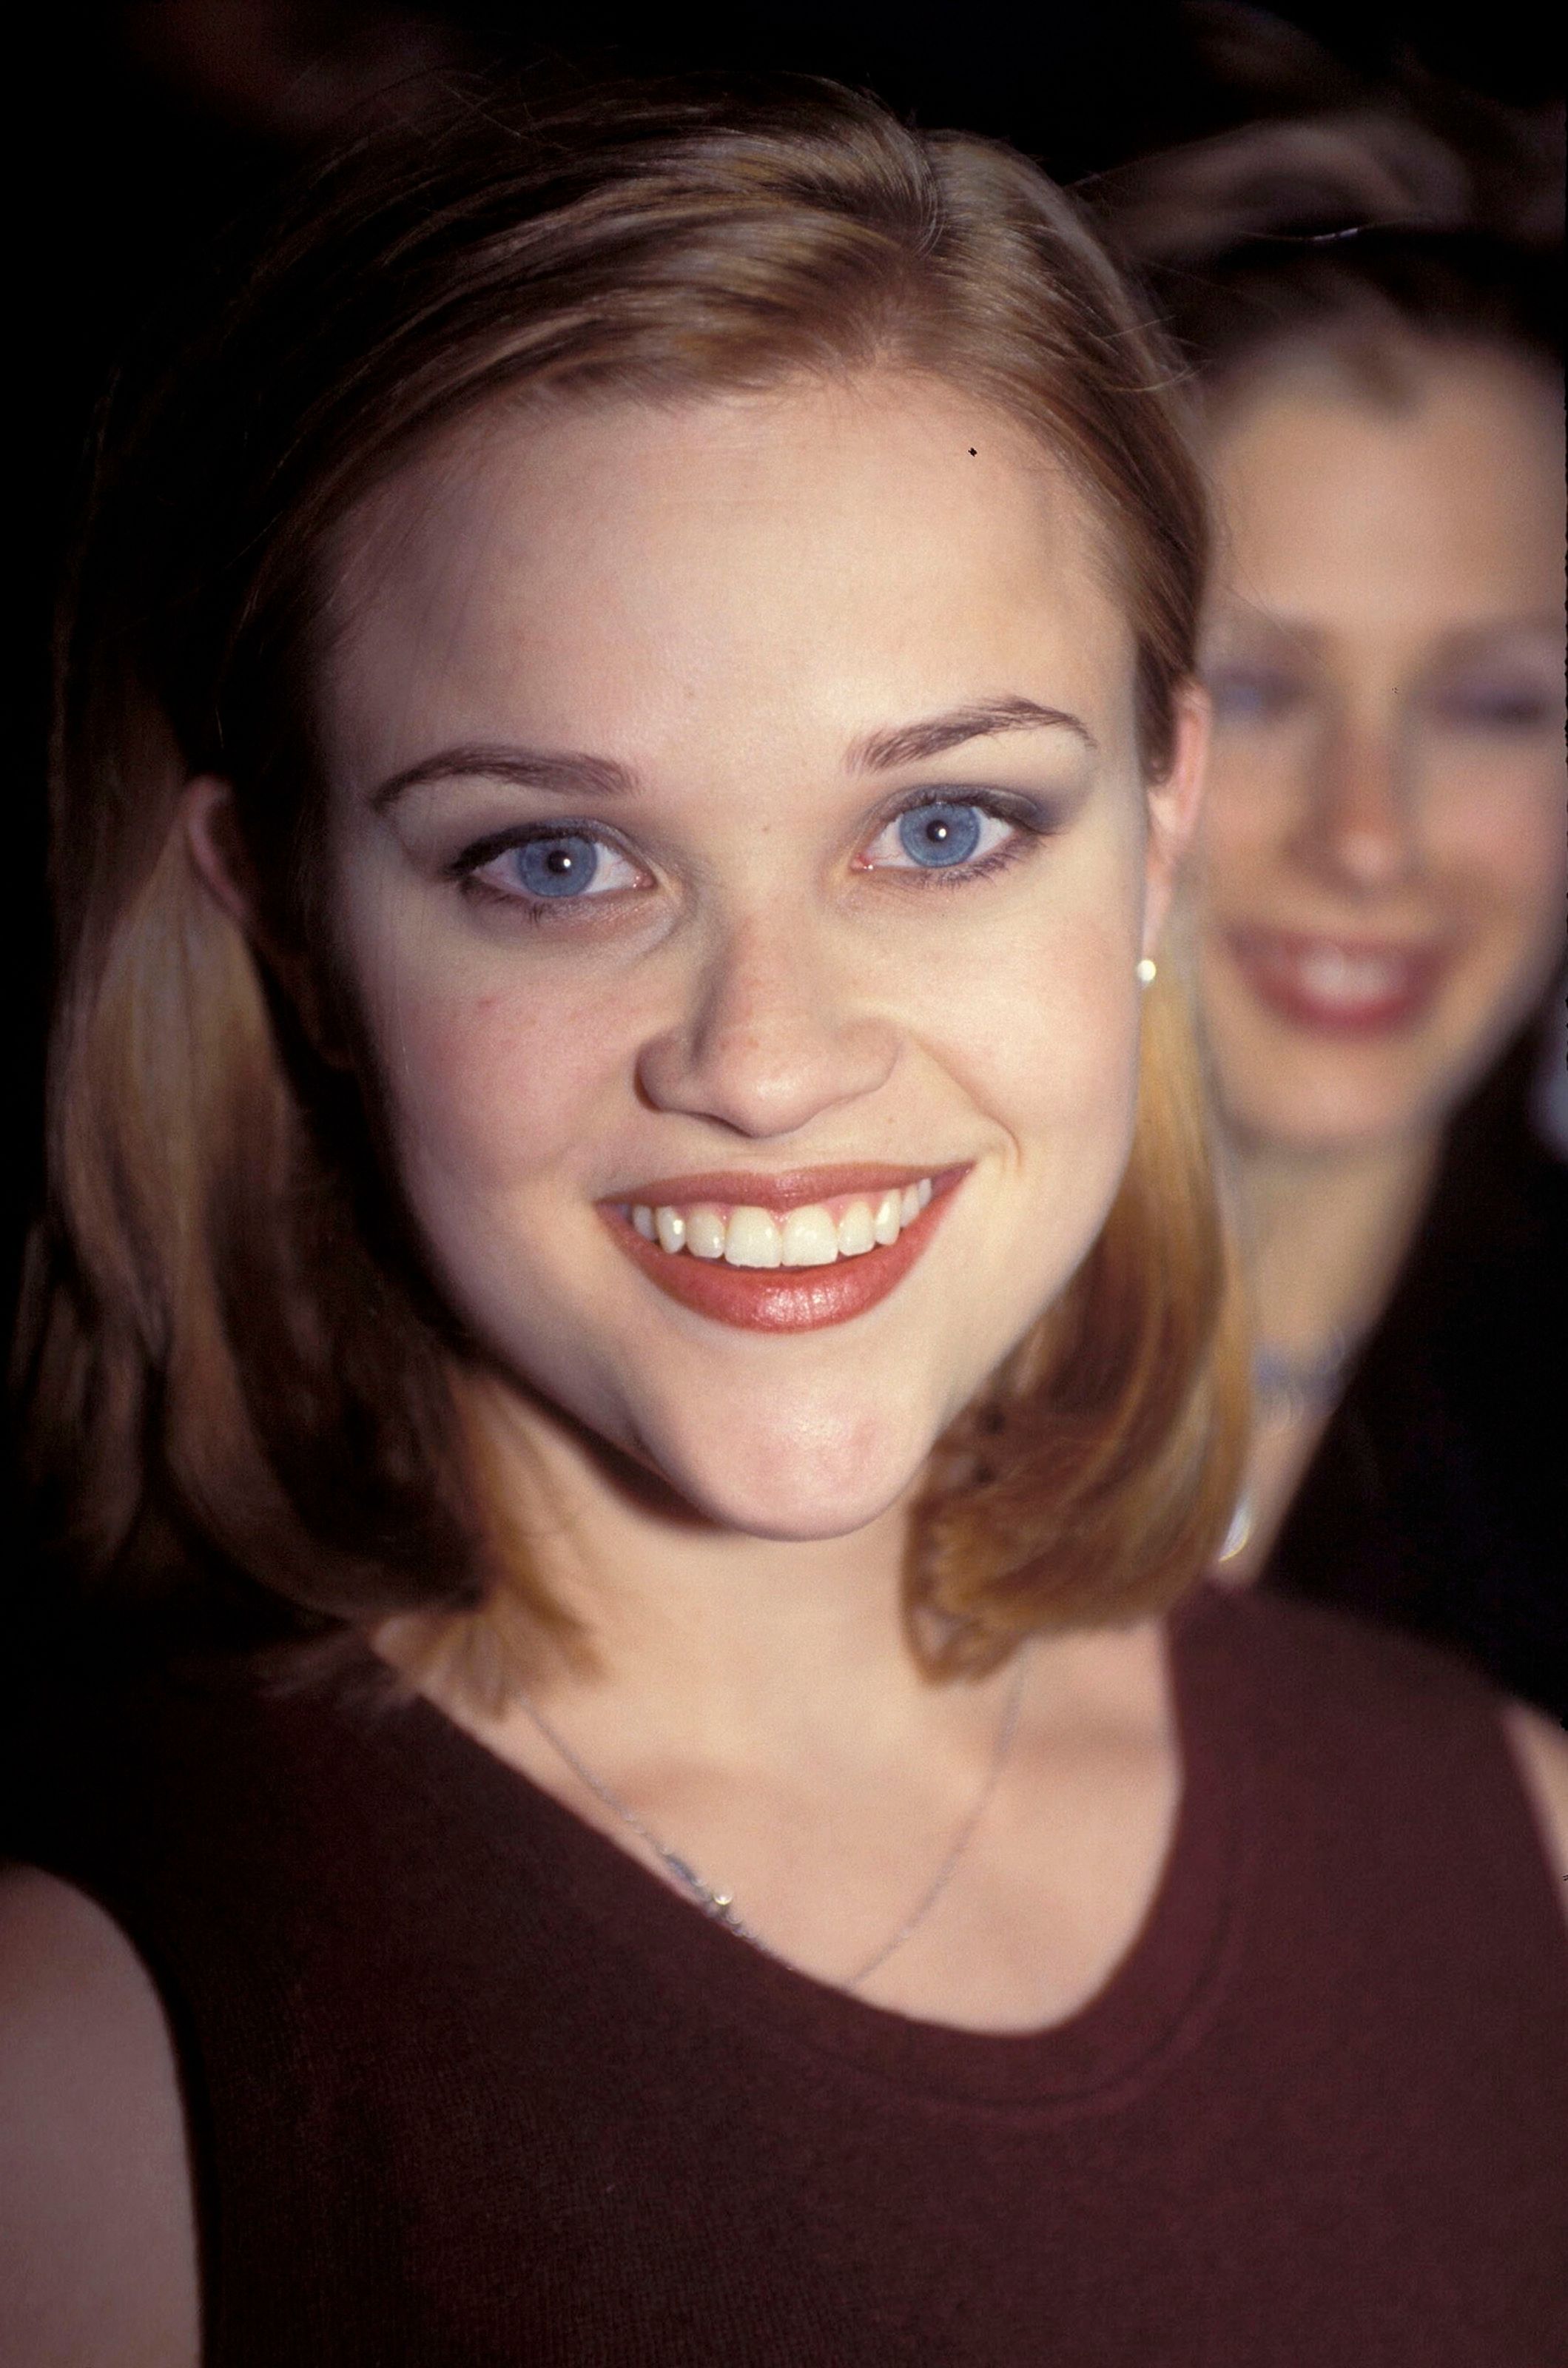 Reese Witherspoon at the Sydney "Fear" film premiere in Sydney, Australia on August 1, 1996 | Photo: Patrick Riviere/Getty Images